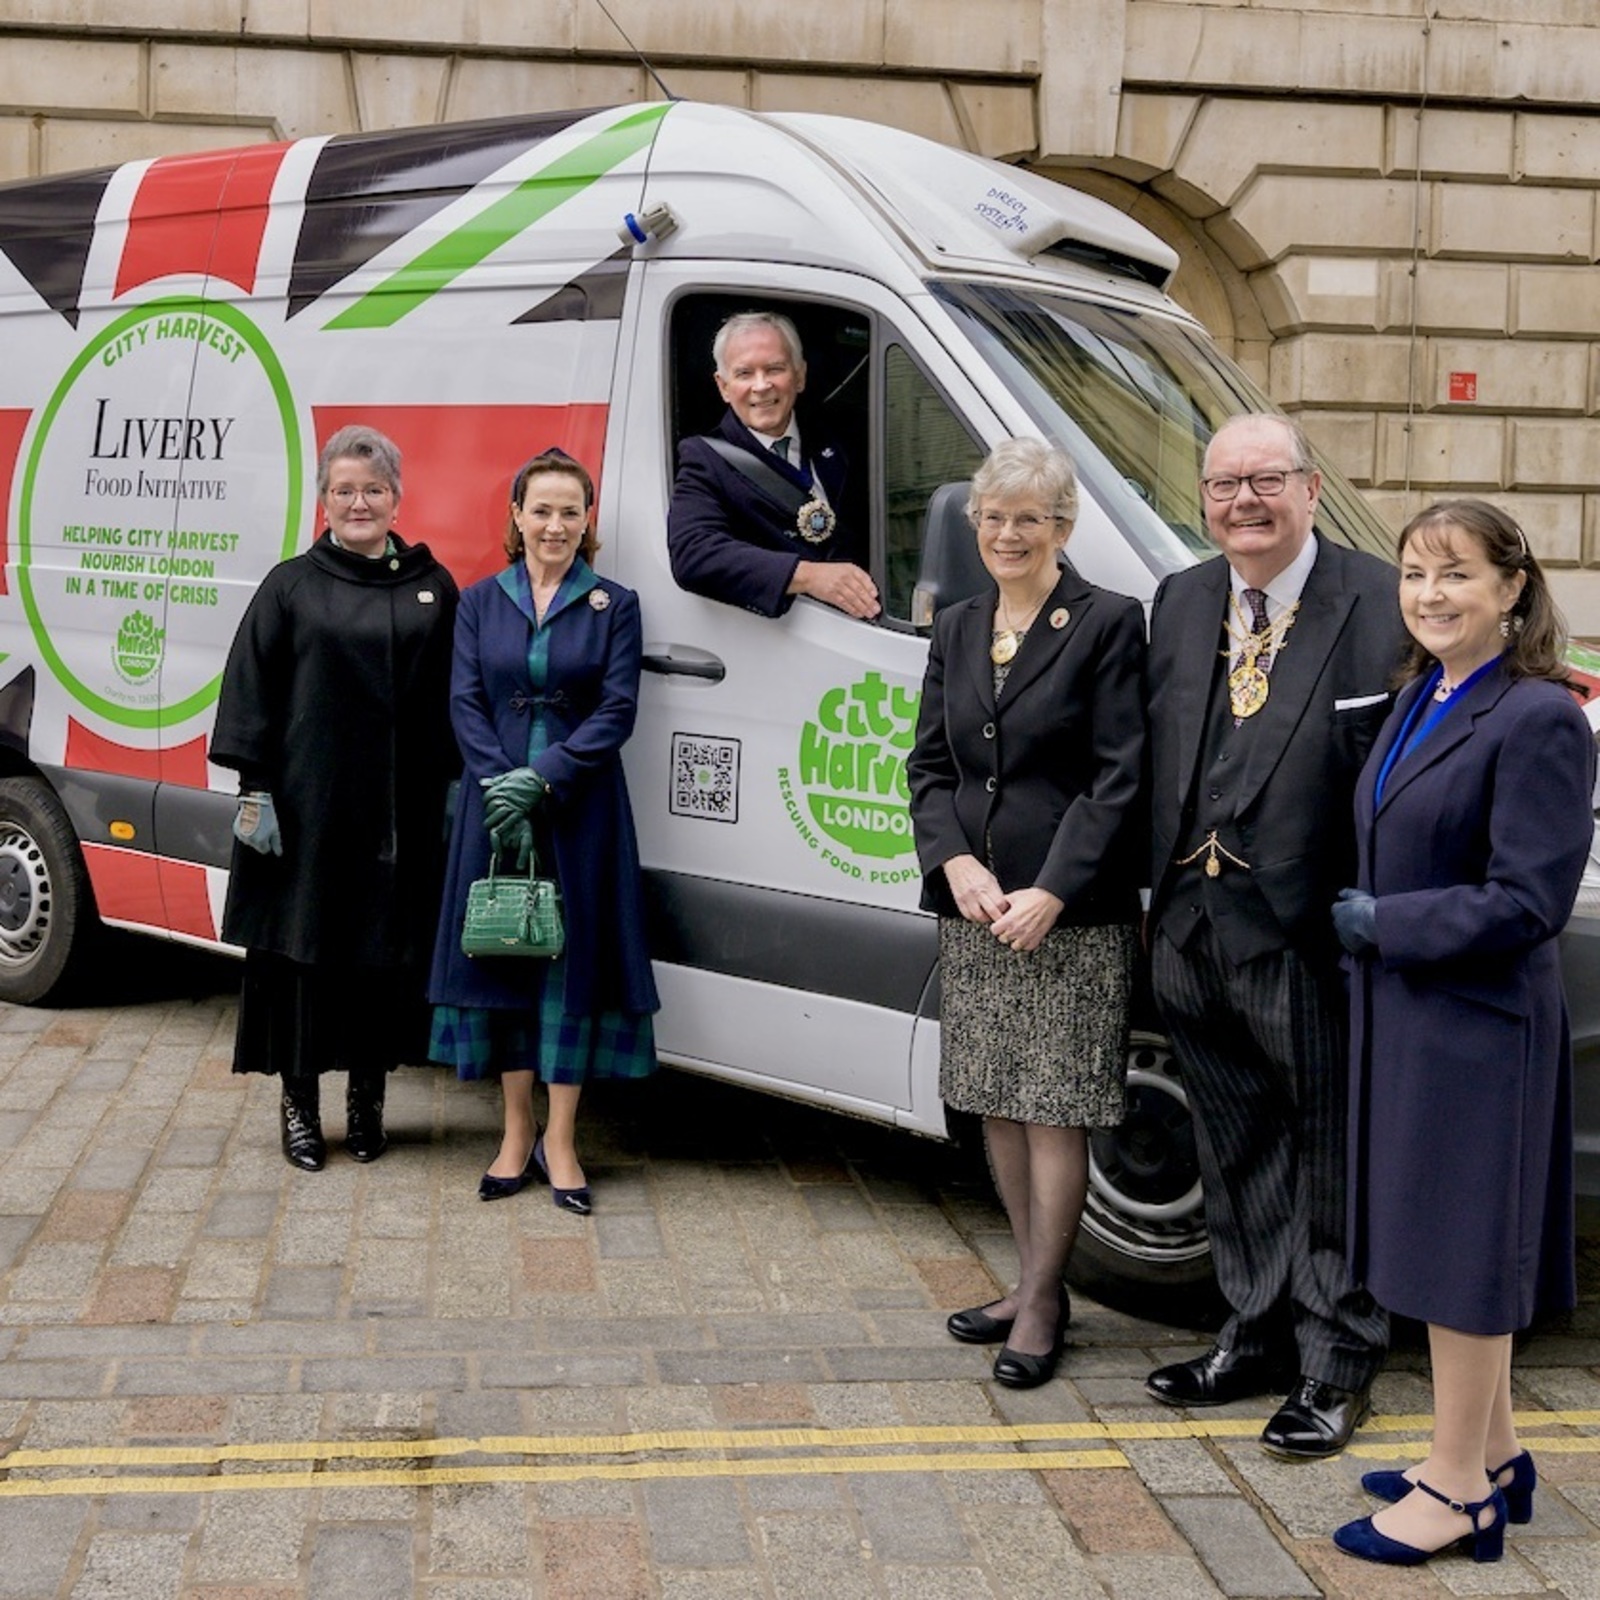 6 Mar 23 - Delighted to attend the launch of the Livery Food Initiative’s Van. 